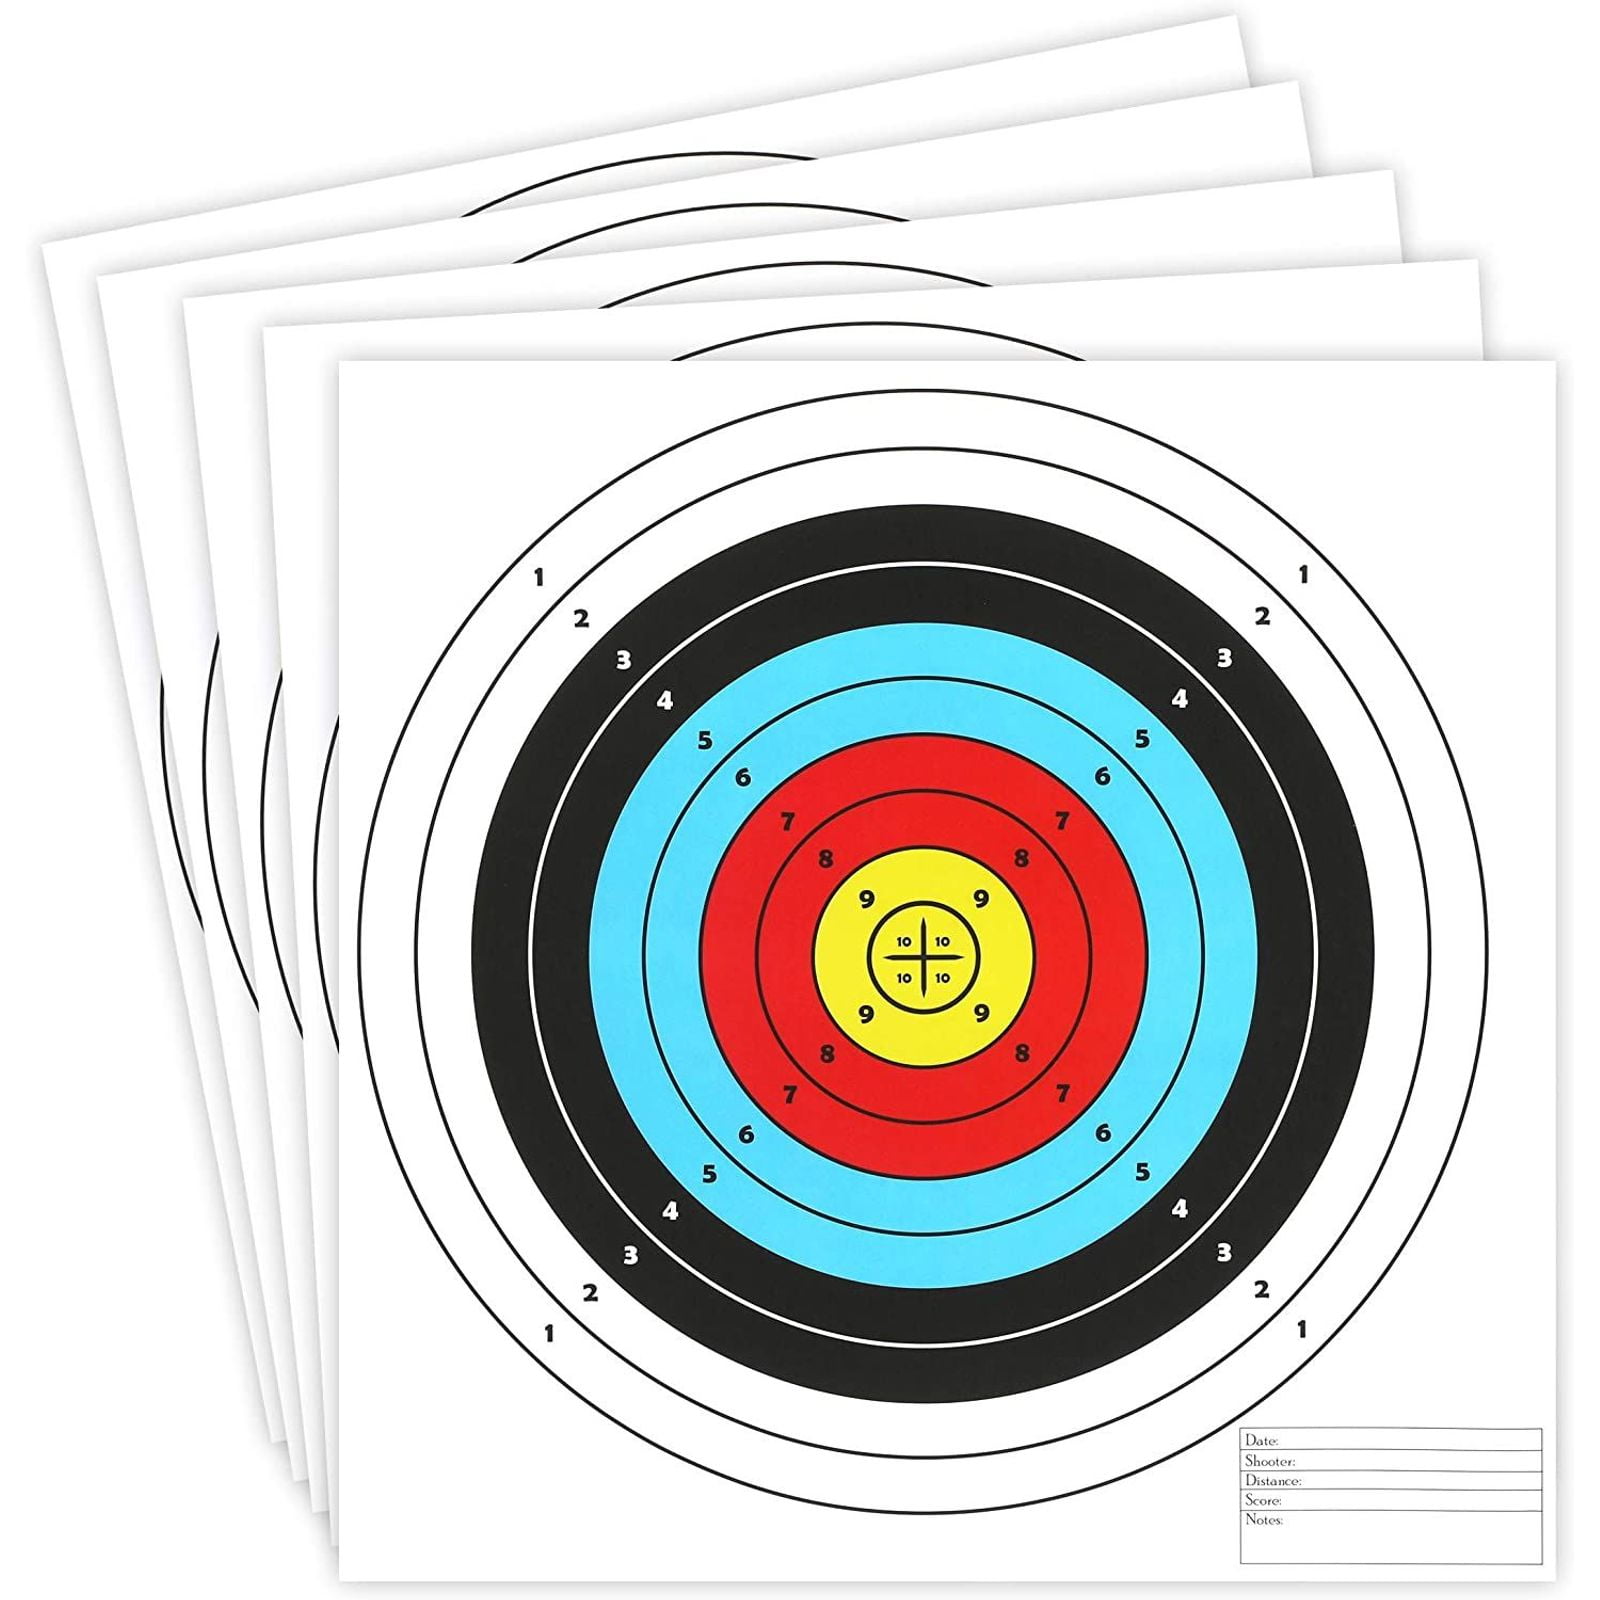 10 Sheet Thick Paper Targets Stickers for Shooting Hunting Archery Practice 